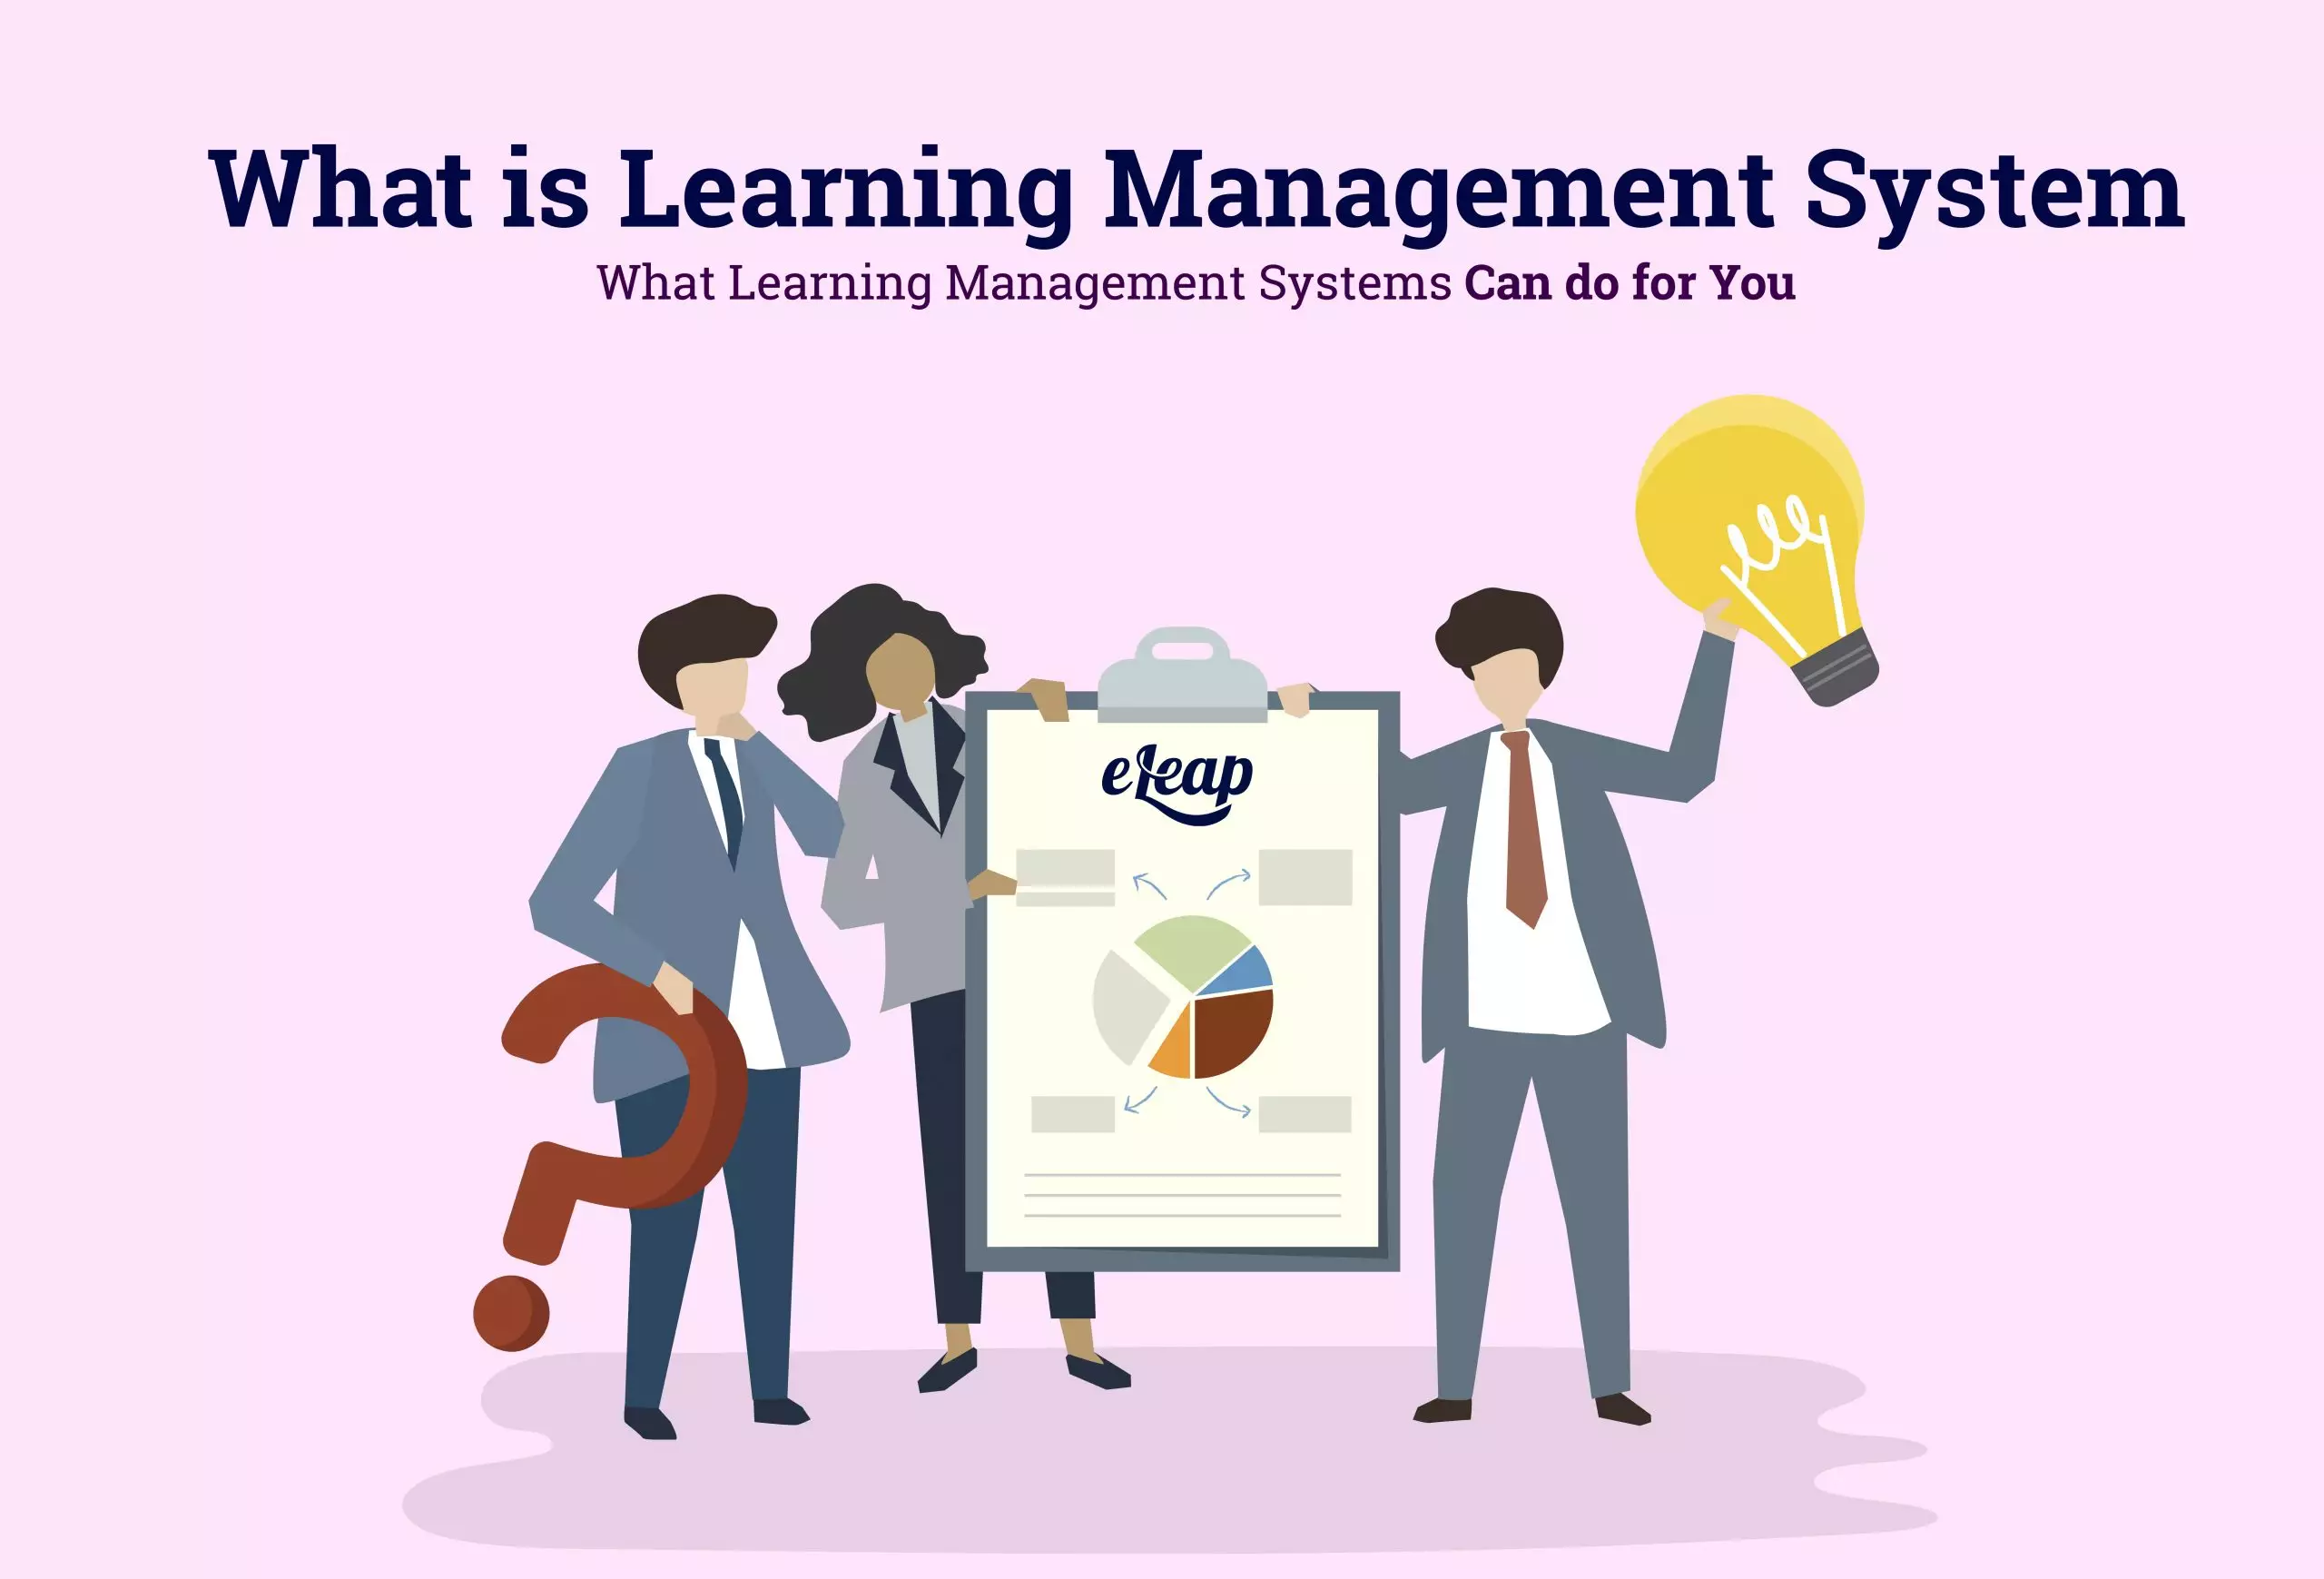 What is Learning Management System: Essential solutions for challenges